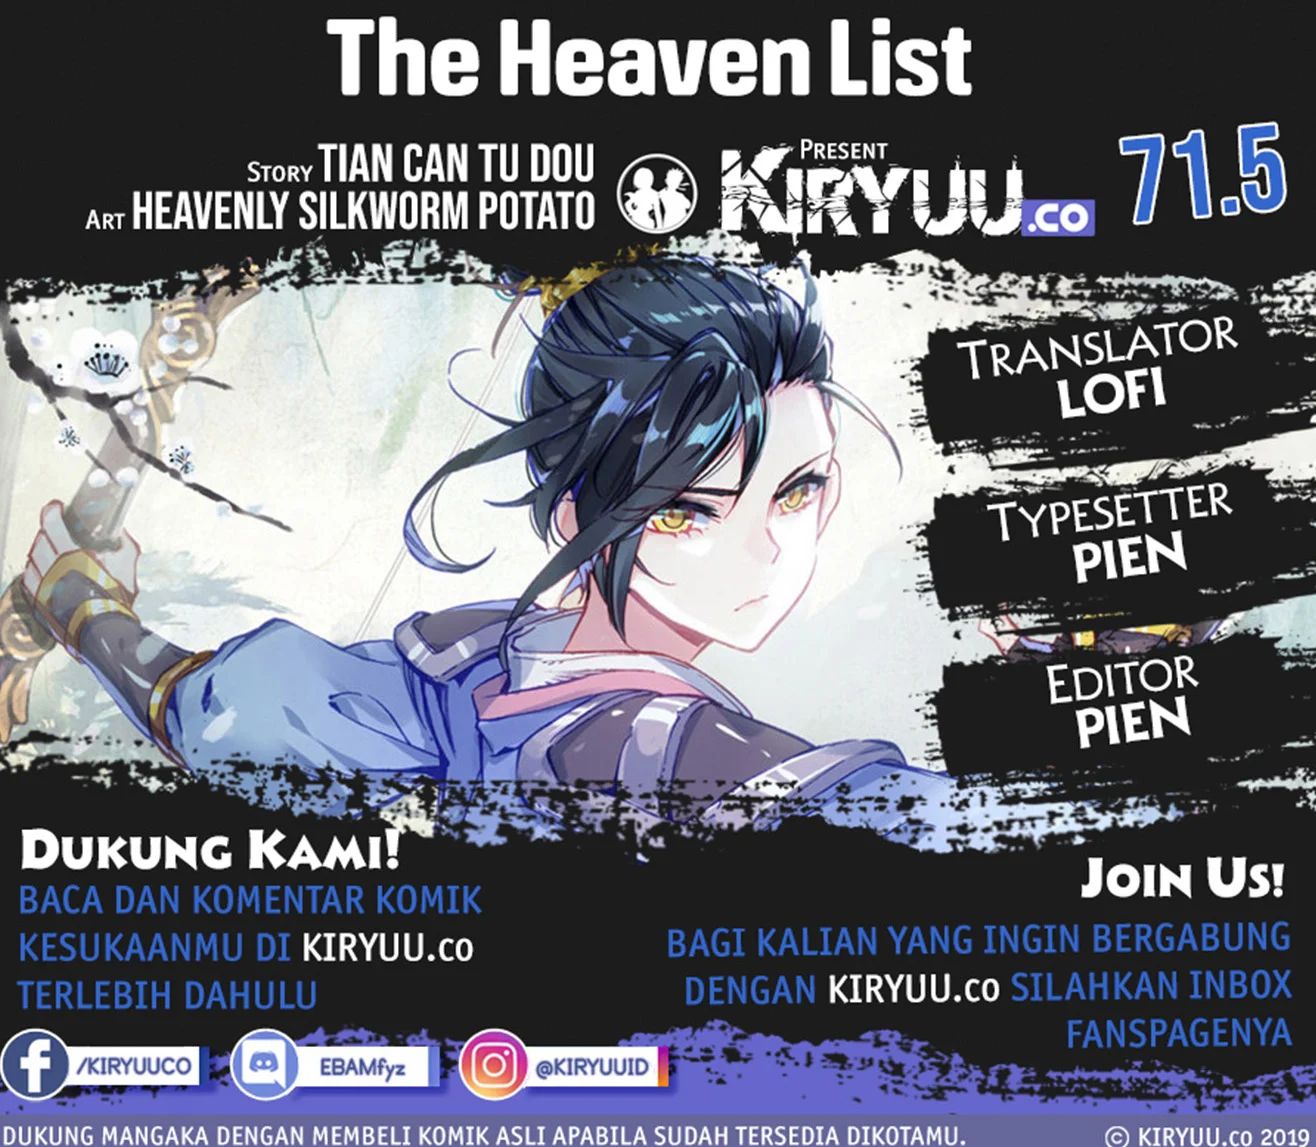 The Heaven List Chapter 71.5